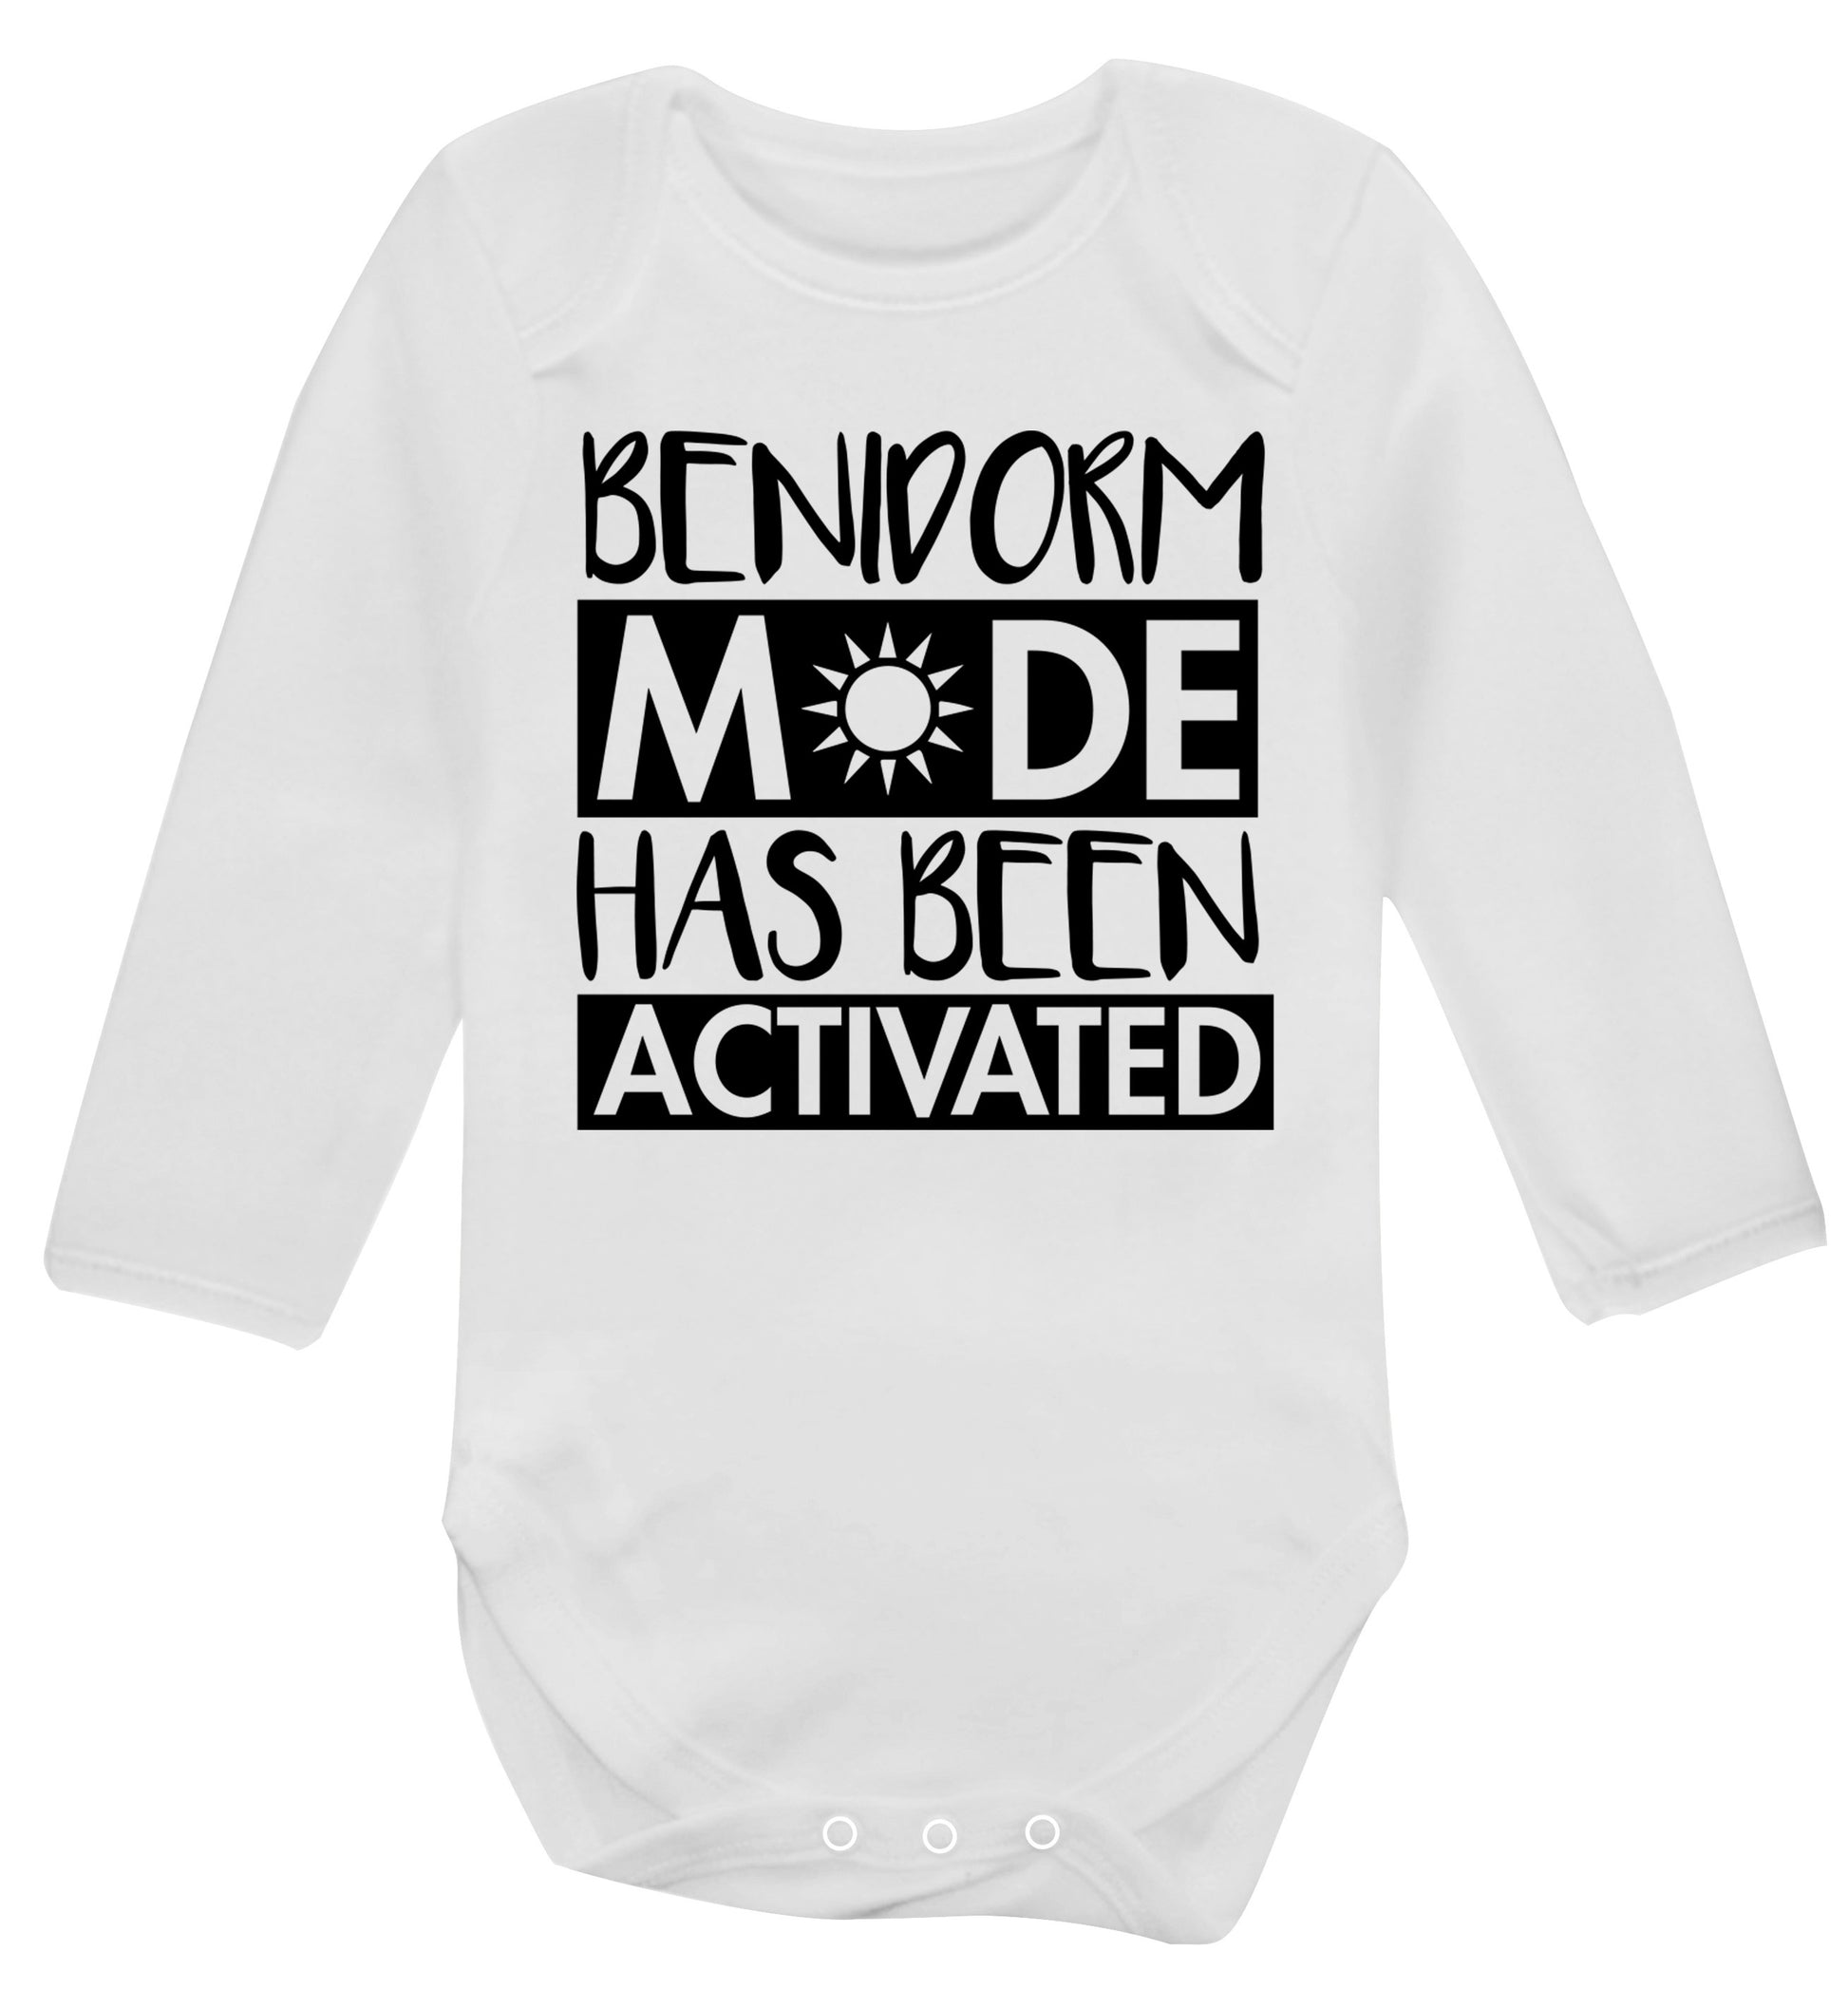 Benidorm mode has been activated Baby Vest long sleeved white 6-12 months